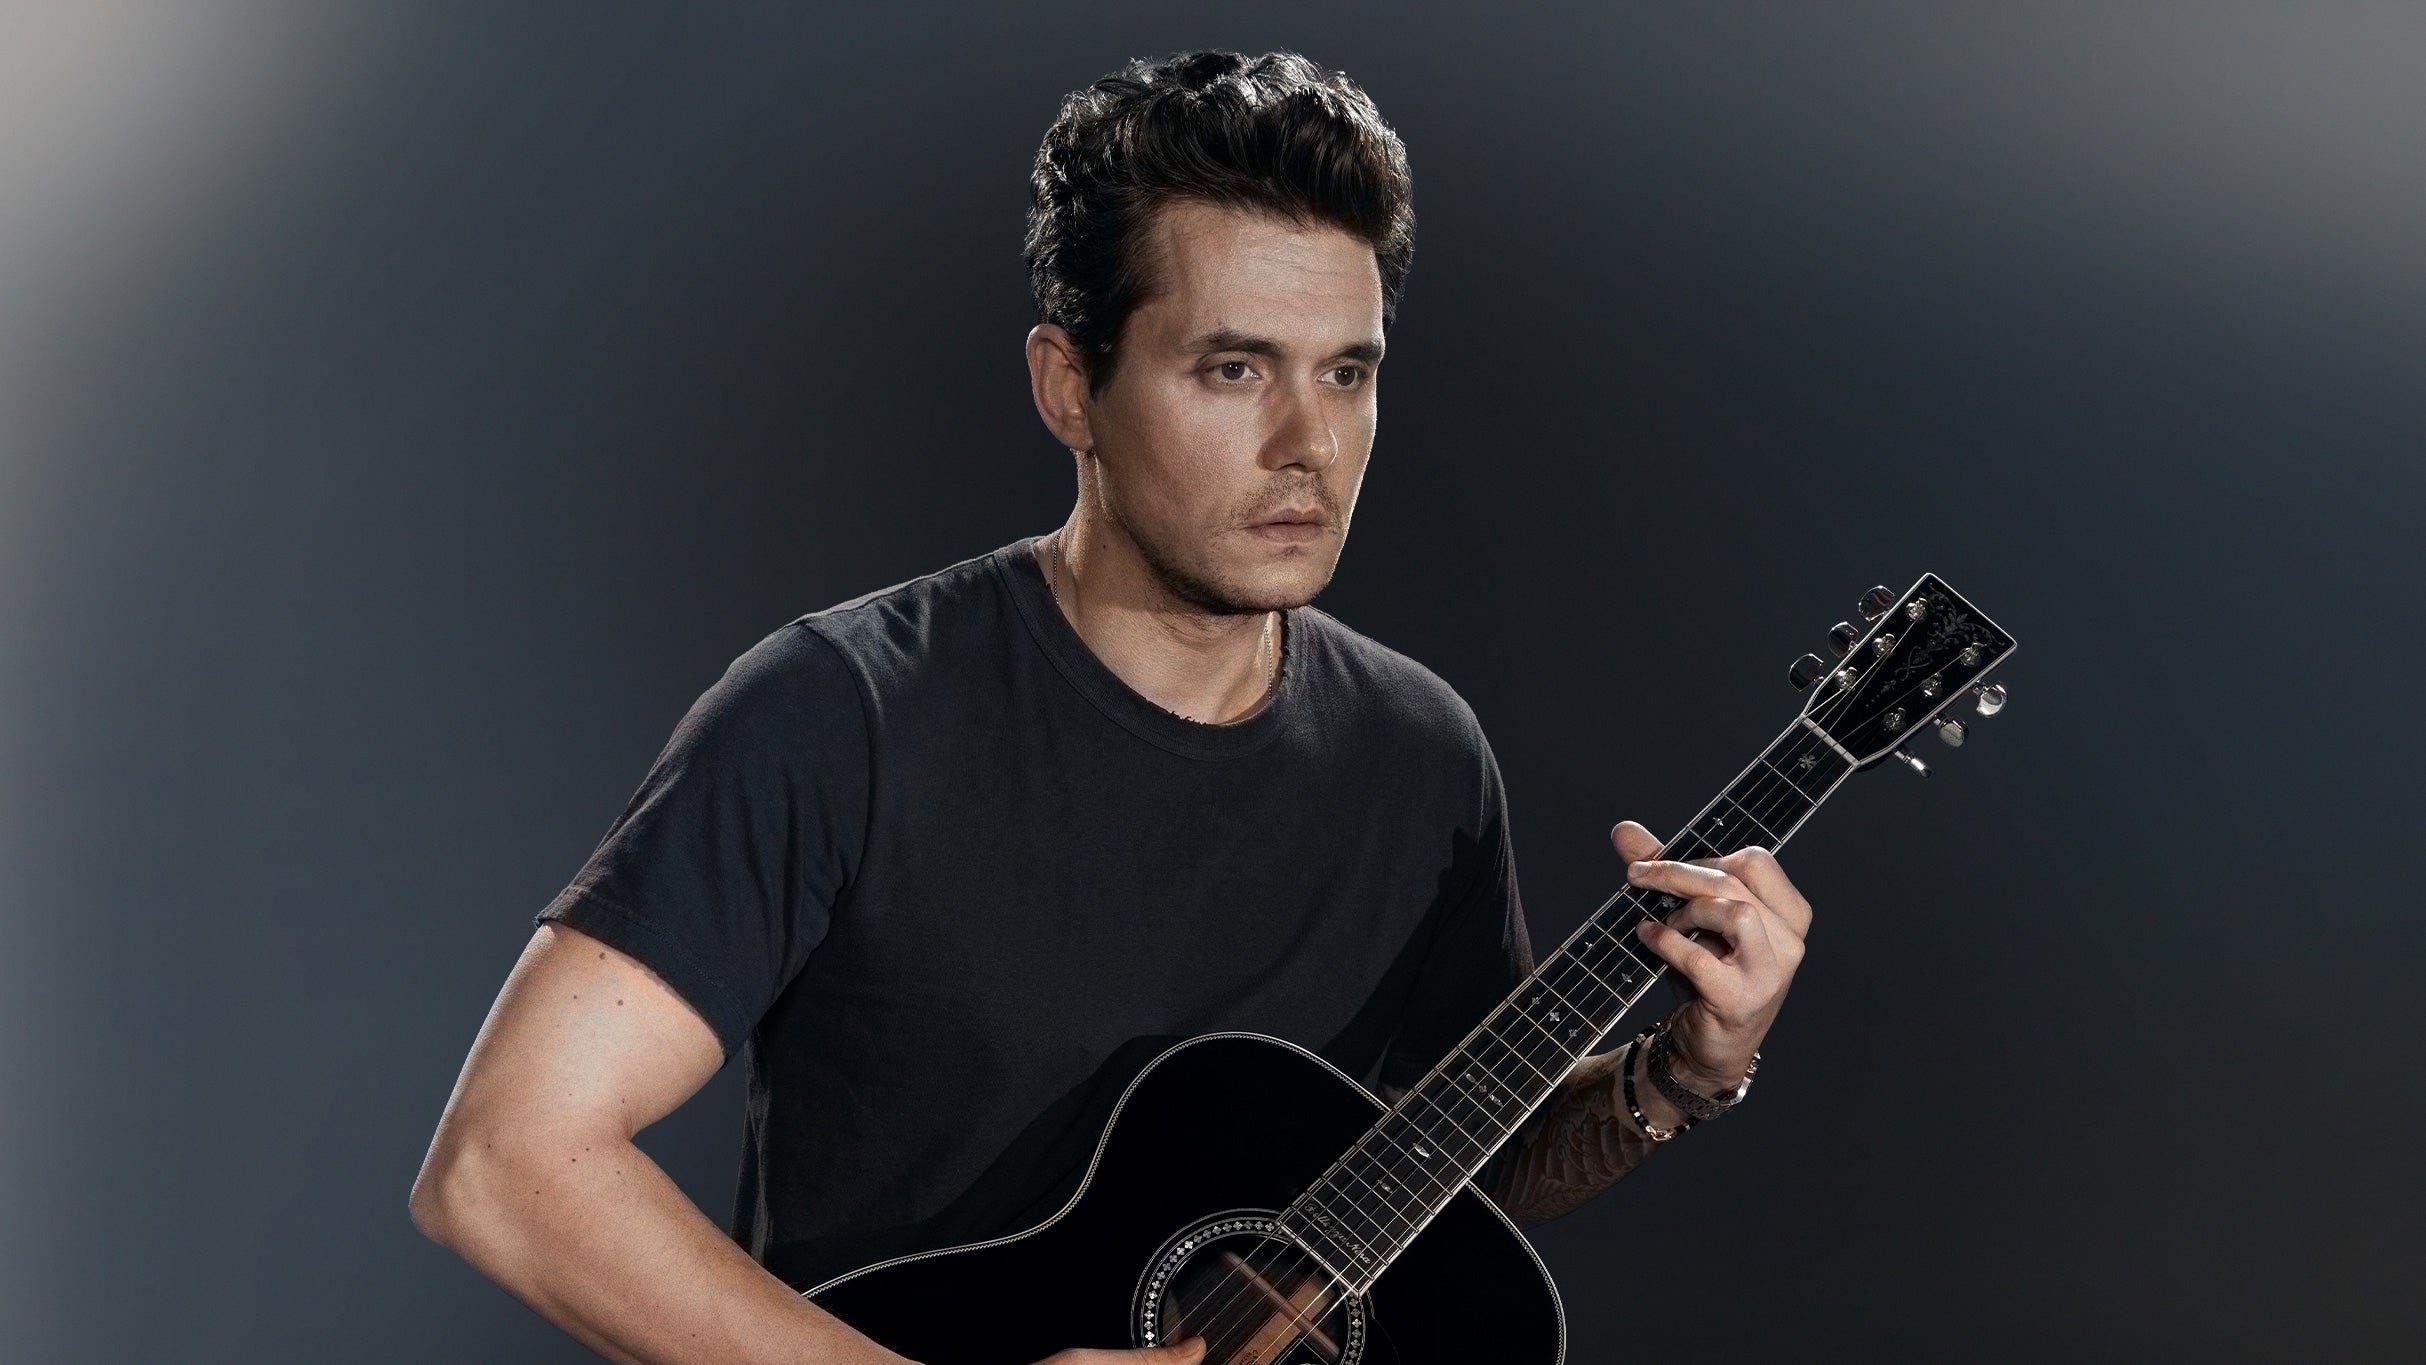 John Mayer - Solo presale code for your tickets in Denver